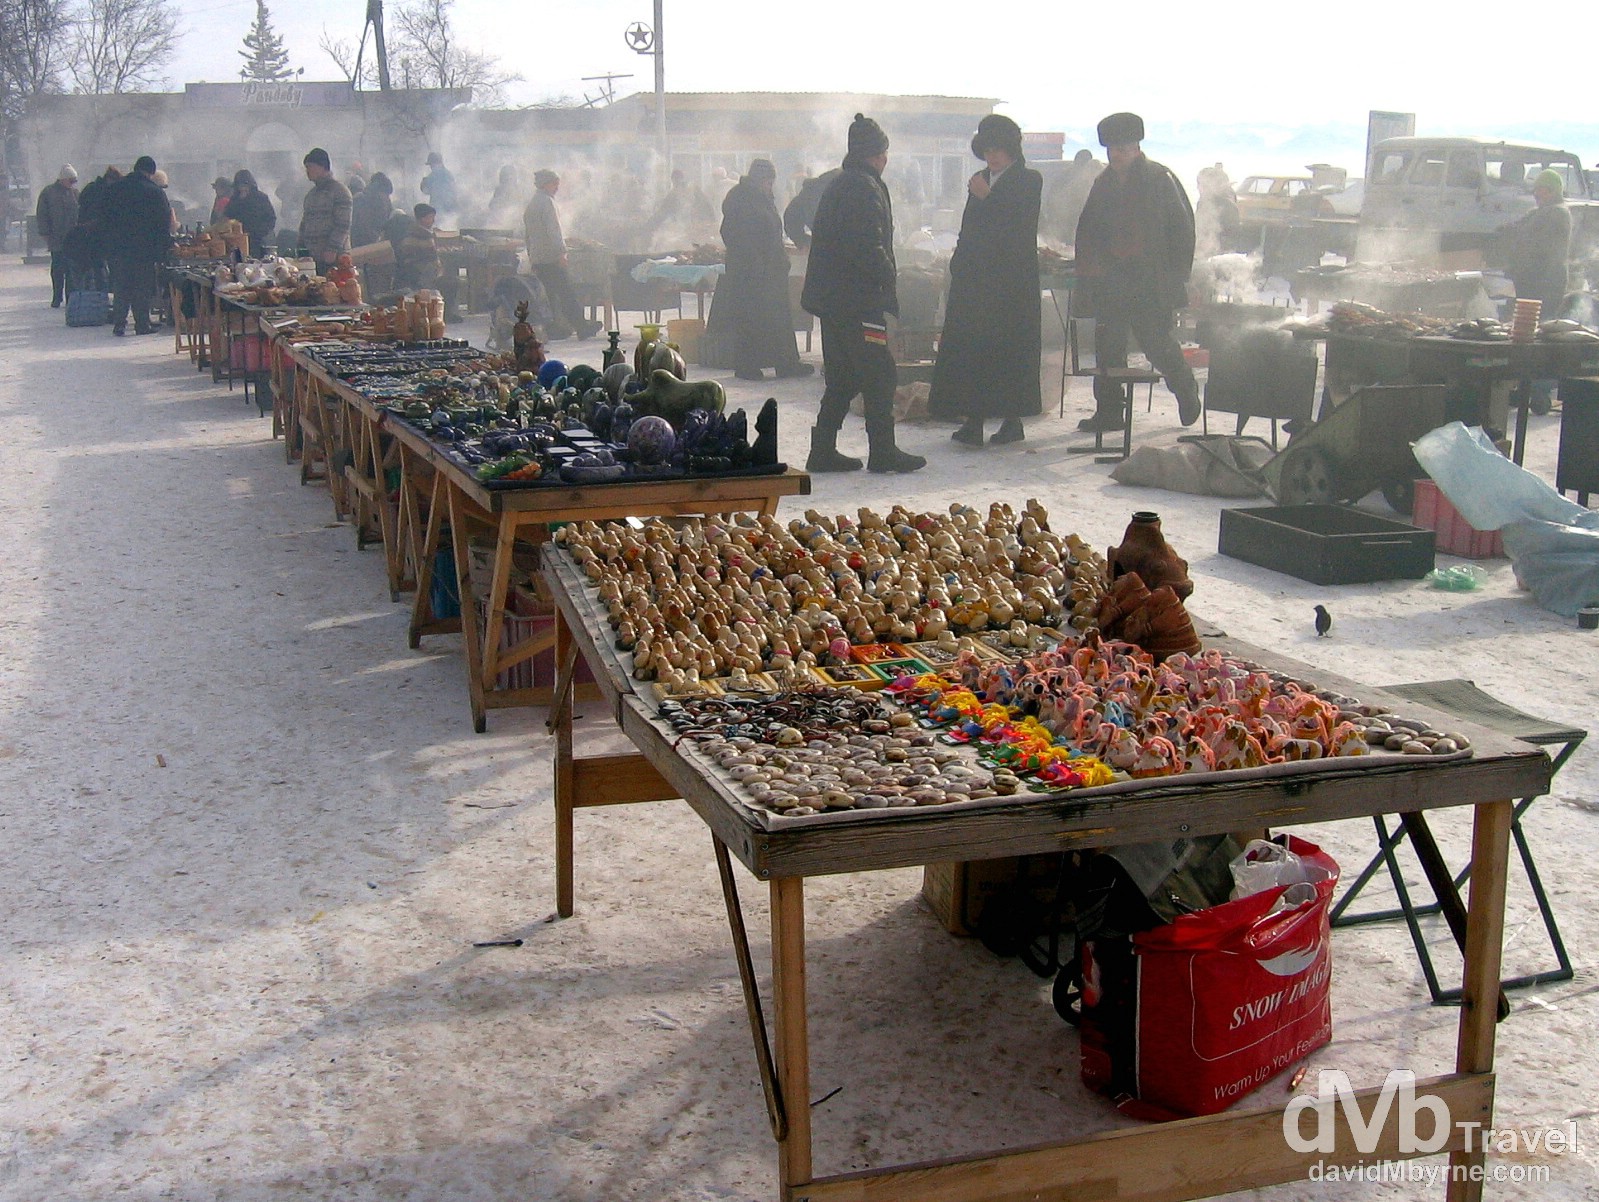 Market day in the village of Listvyanka on the shores of Lake Baikal in Siberian Russia. February 18, 2006. 